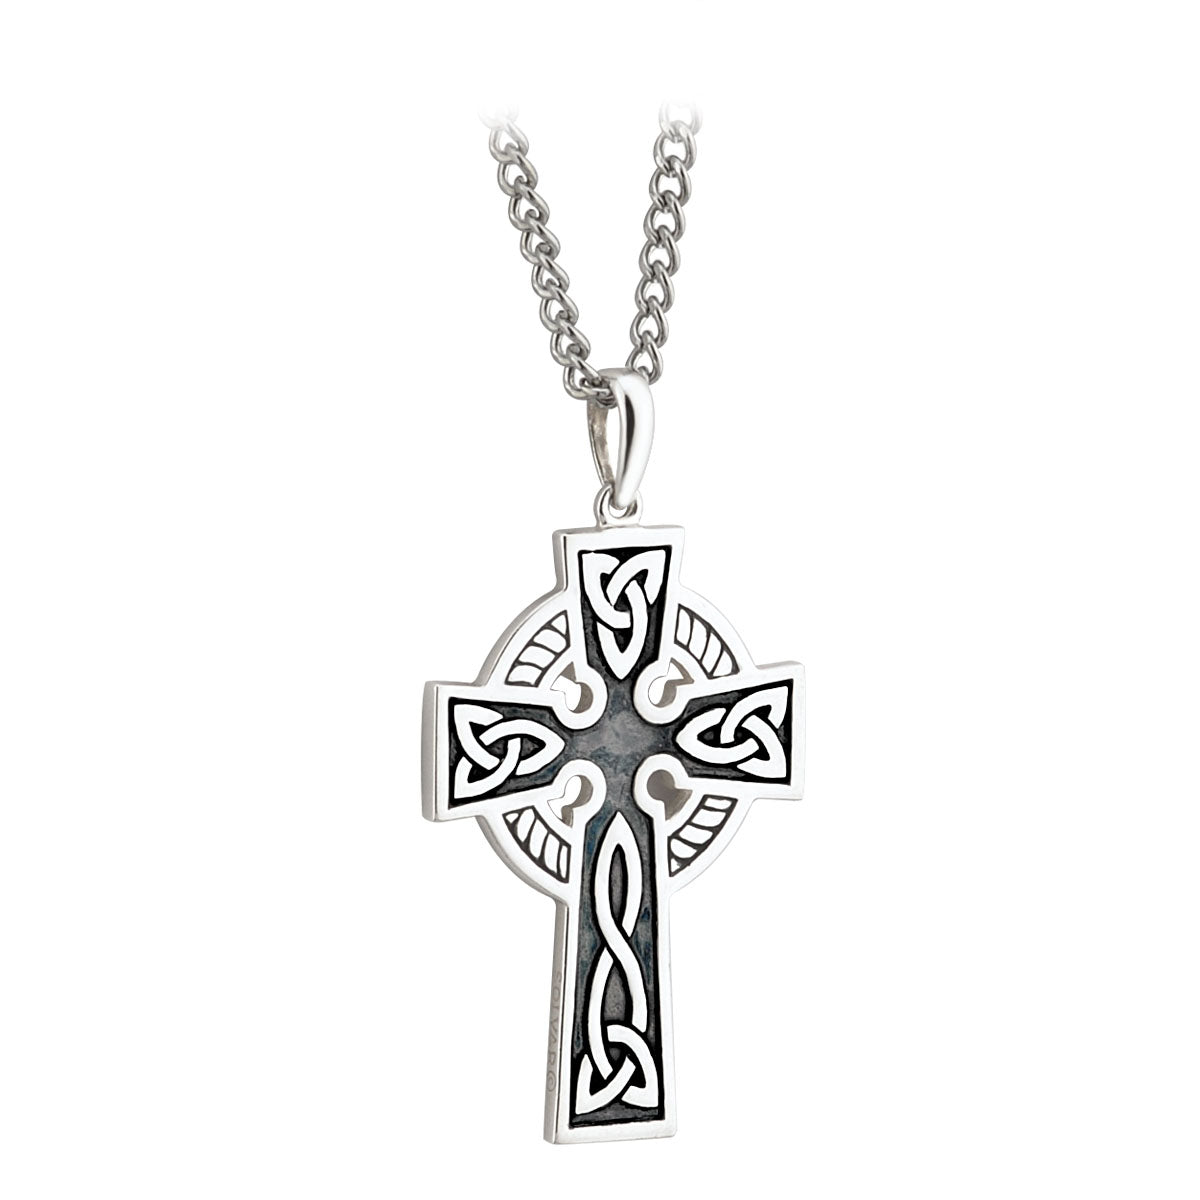 sterling silver double sided oxidised cross pendant s44764 from Solvar